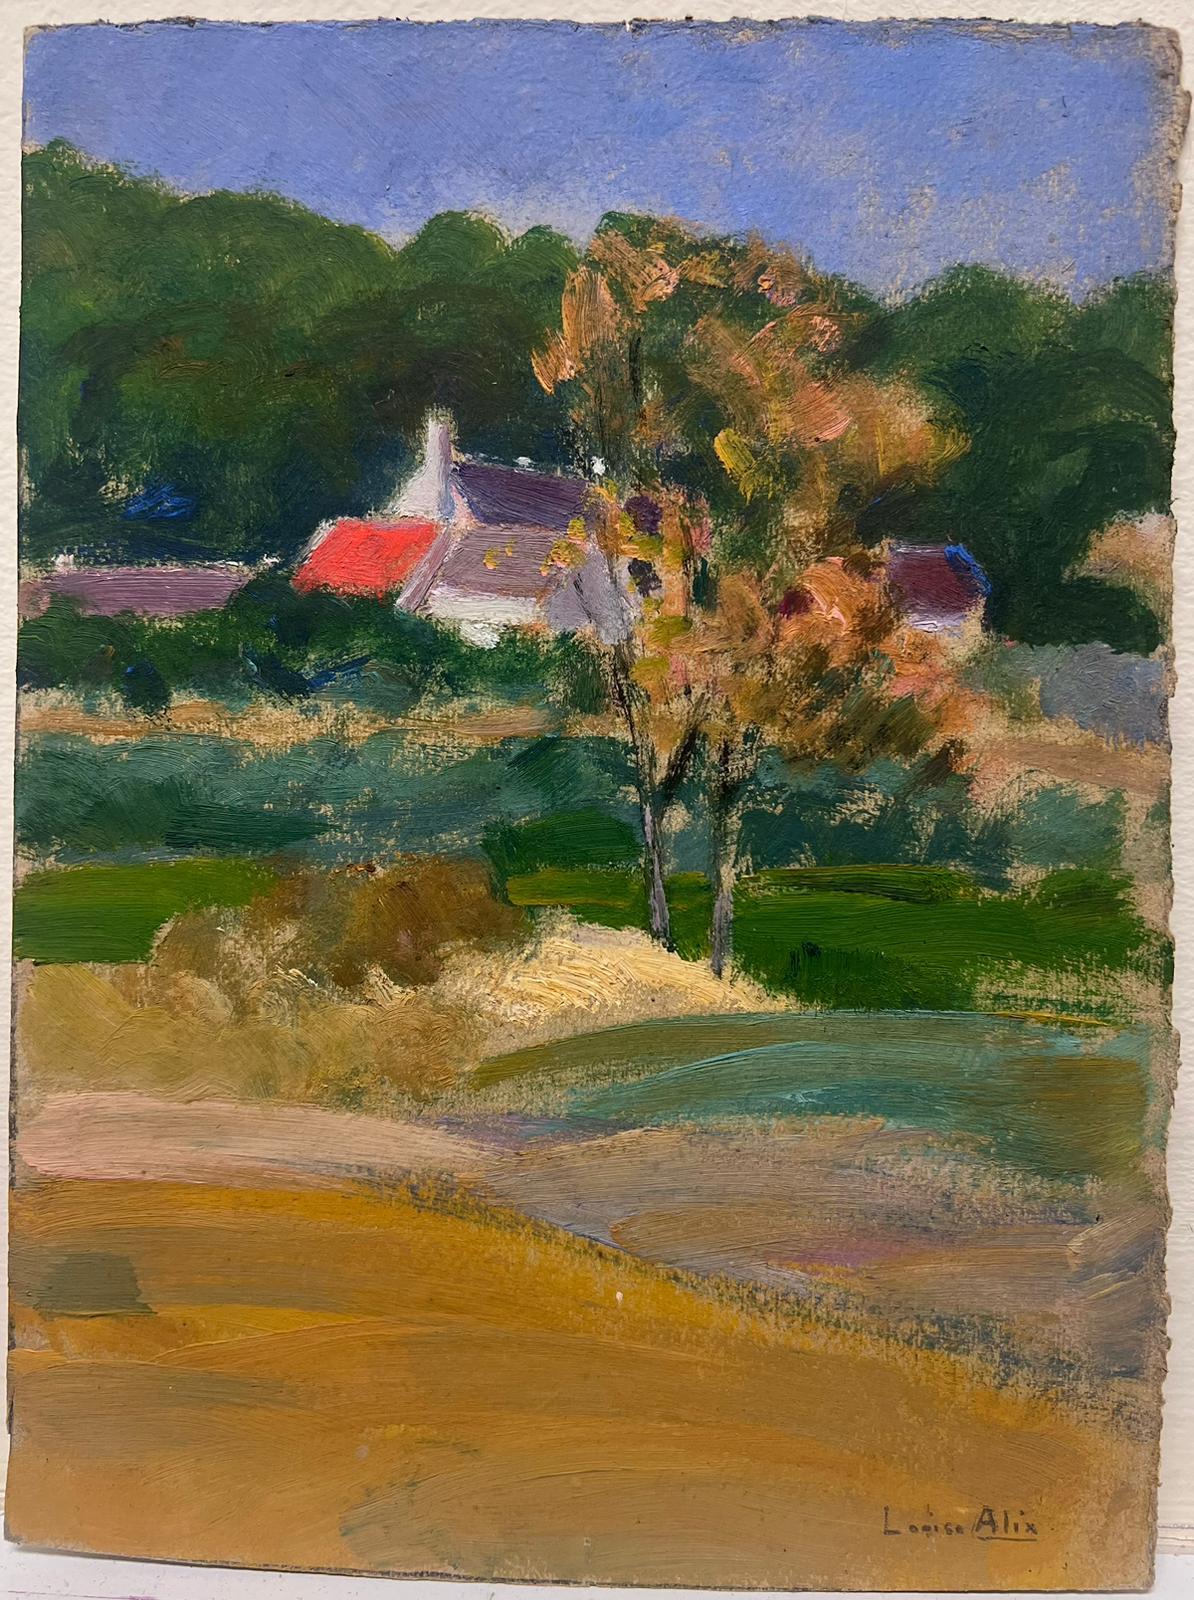 French Landscape
by Louise Alix (French, 1888-1980) *see notes below
provenance stamp to the back 
signed oil painting on board, unframed
measures: 9.5 high by 7 inches wide
condition: overall very good and sound, a few scuffs and marks to the